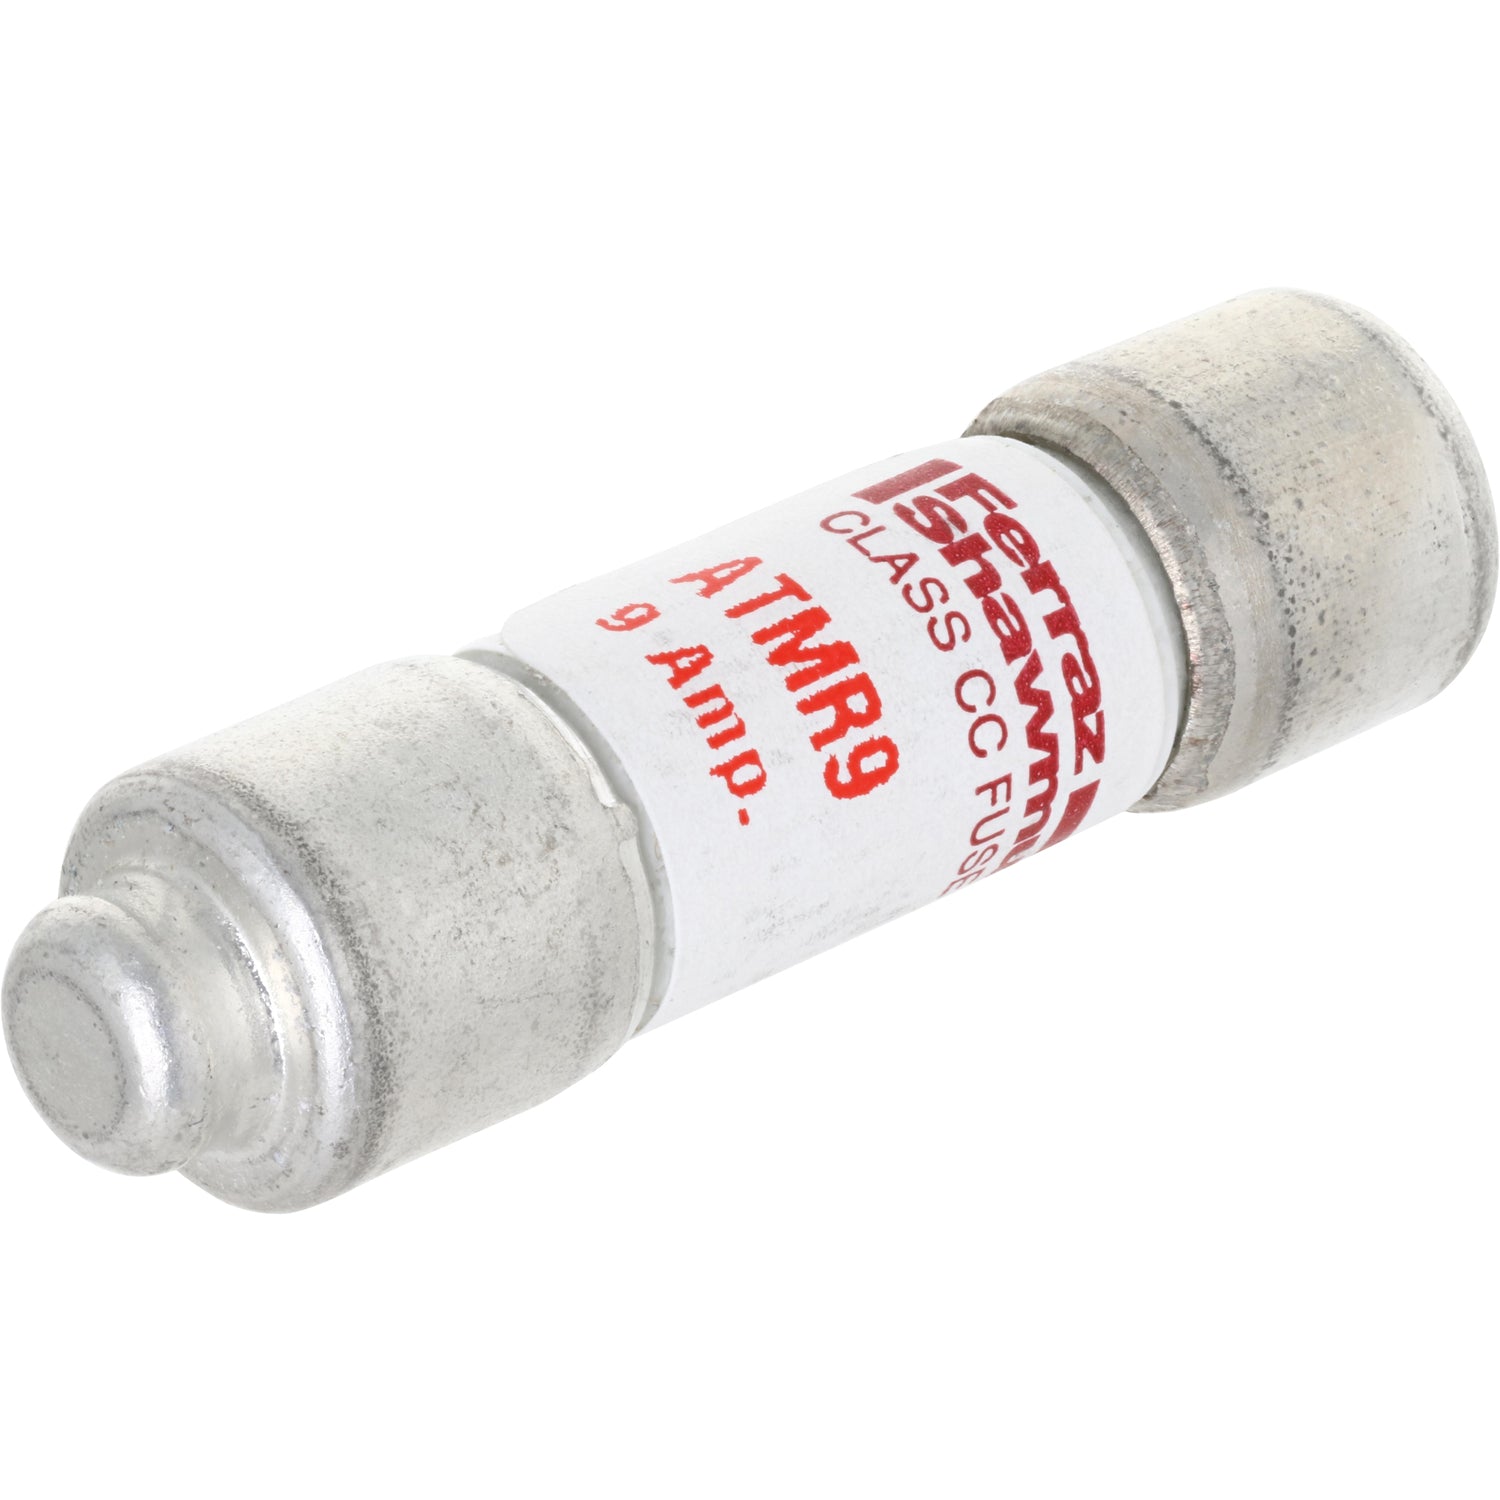 Mersen 9A Fast Acting Fuse 0.5625&quot; x 2&quot; shown on white background.